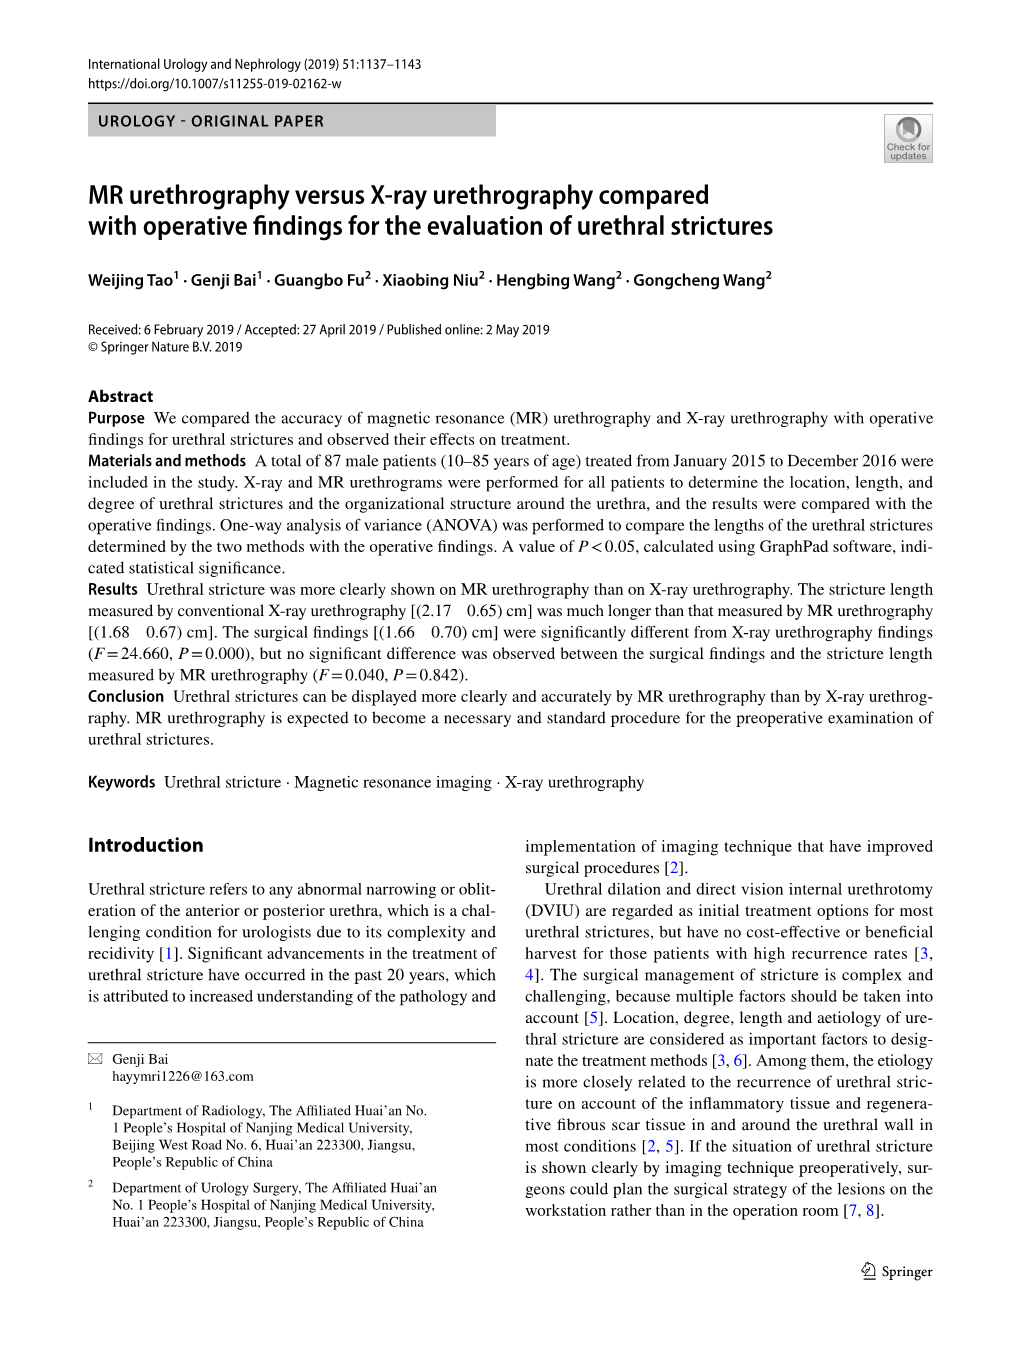 MR Urethrography Versus X-Ray Urethrography Compared with Operative Findings for the Evaluation of Urethral Strictures